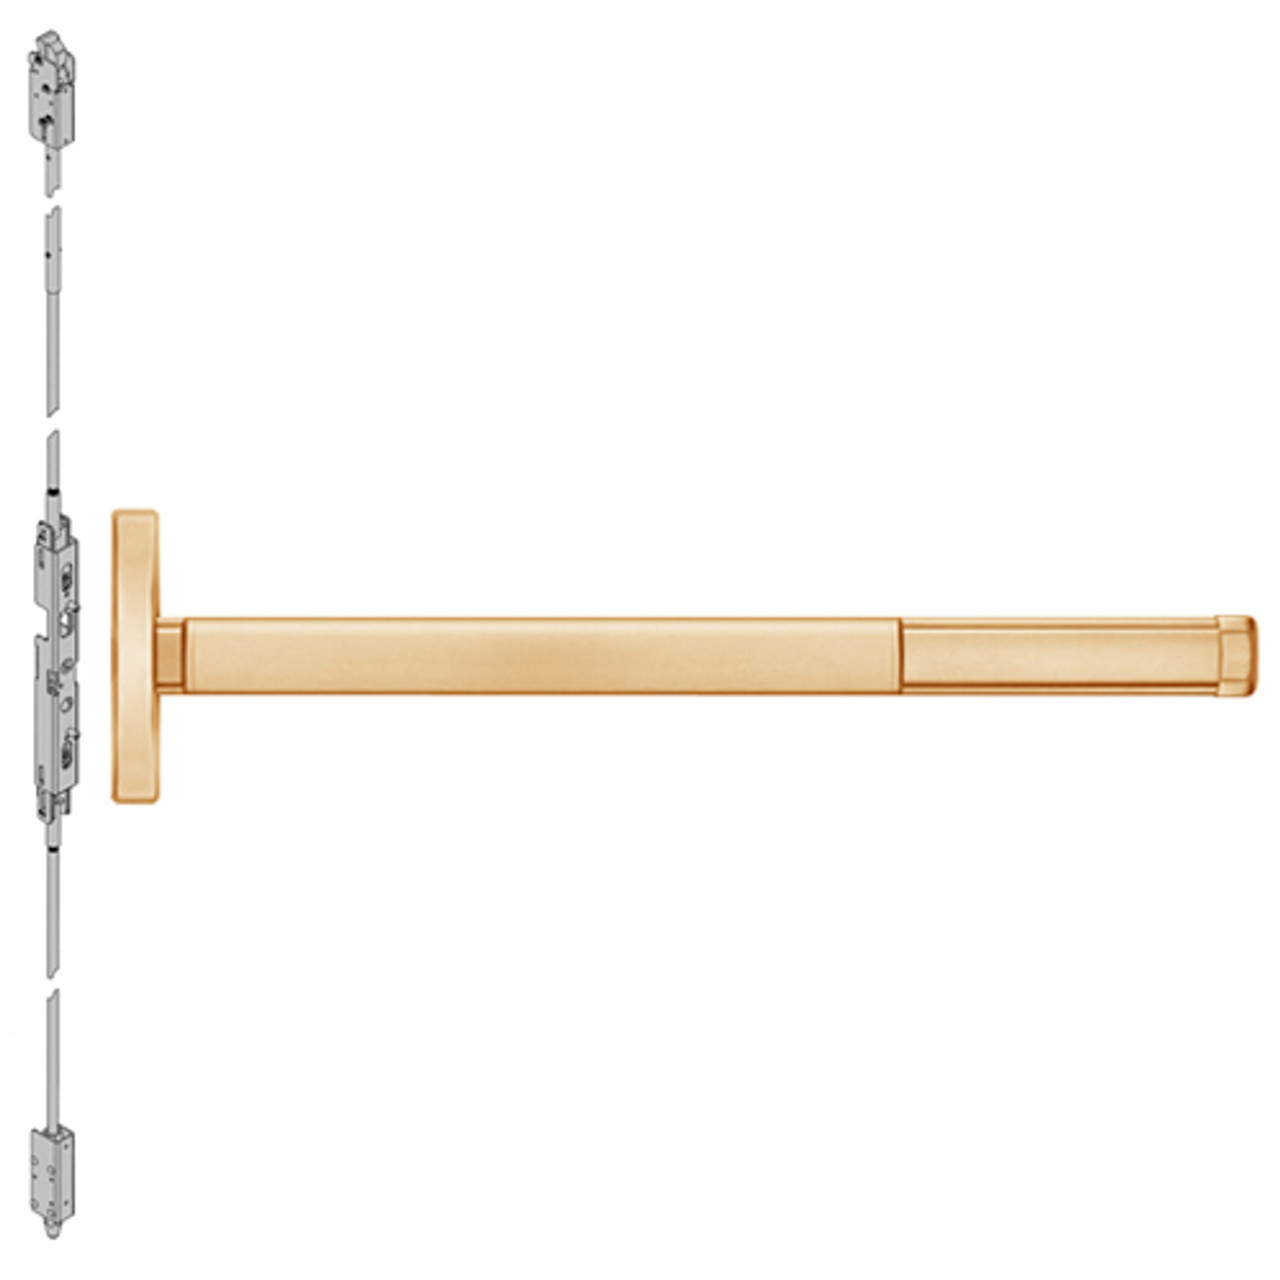 TSFL2602LBR-612-48 PHI 2600 Series Fire Rated Concealed Vertical Rod Exit Device with Touchbar Monitoring Switch Prepped for Dummy Trim in Satin Bronze Finish